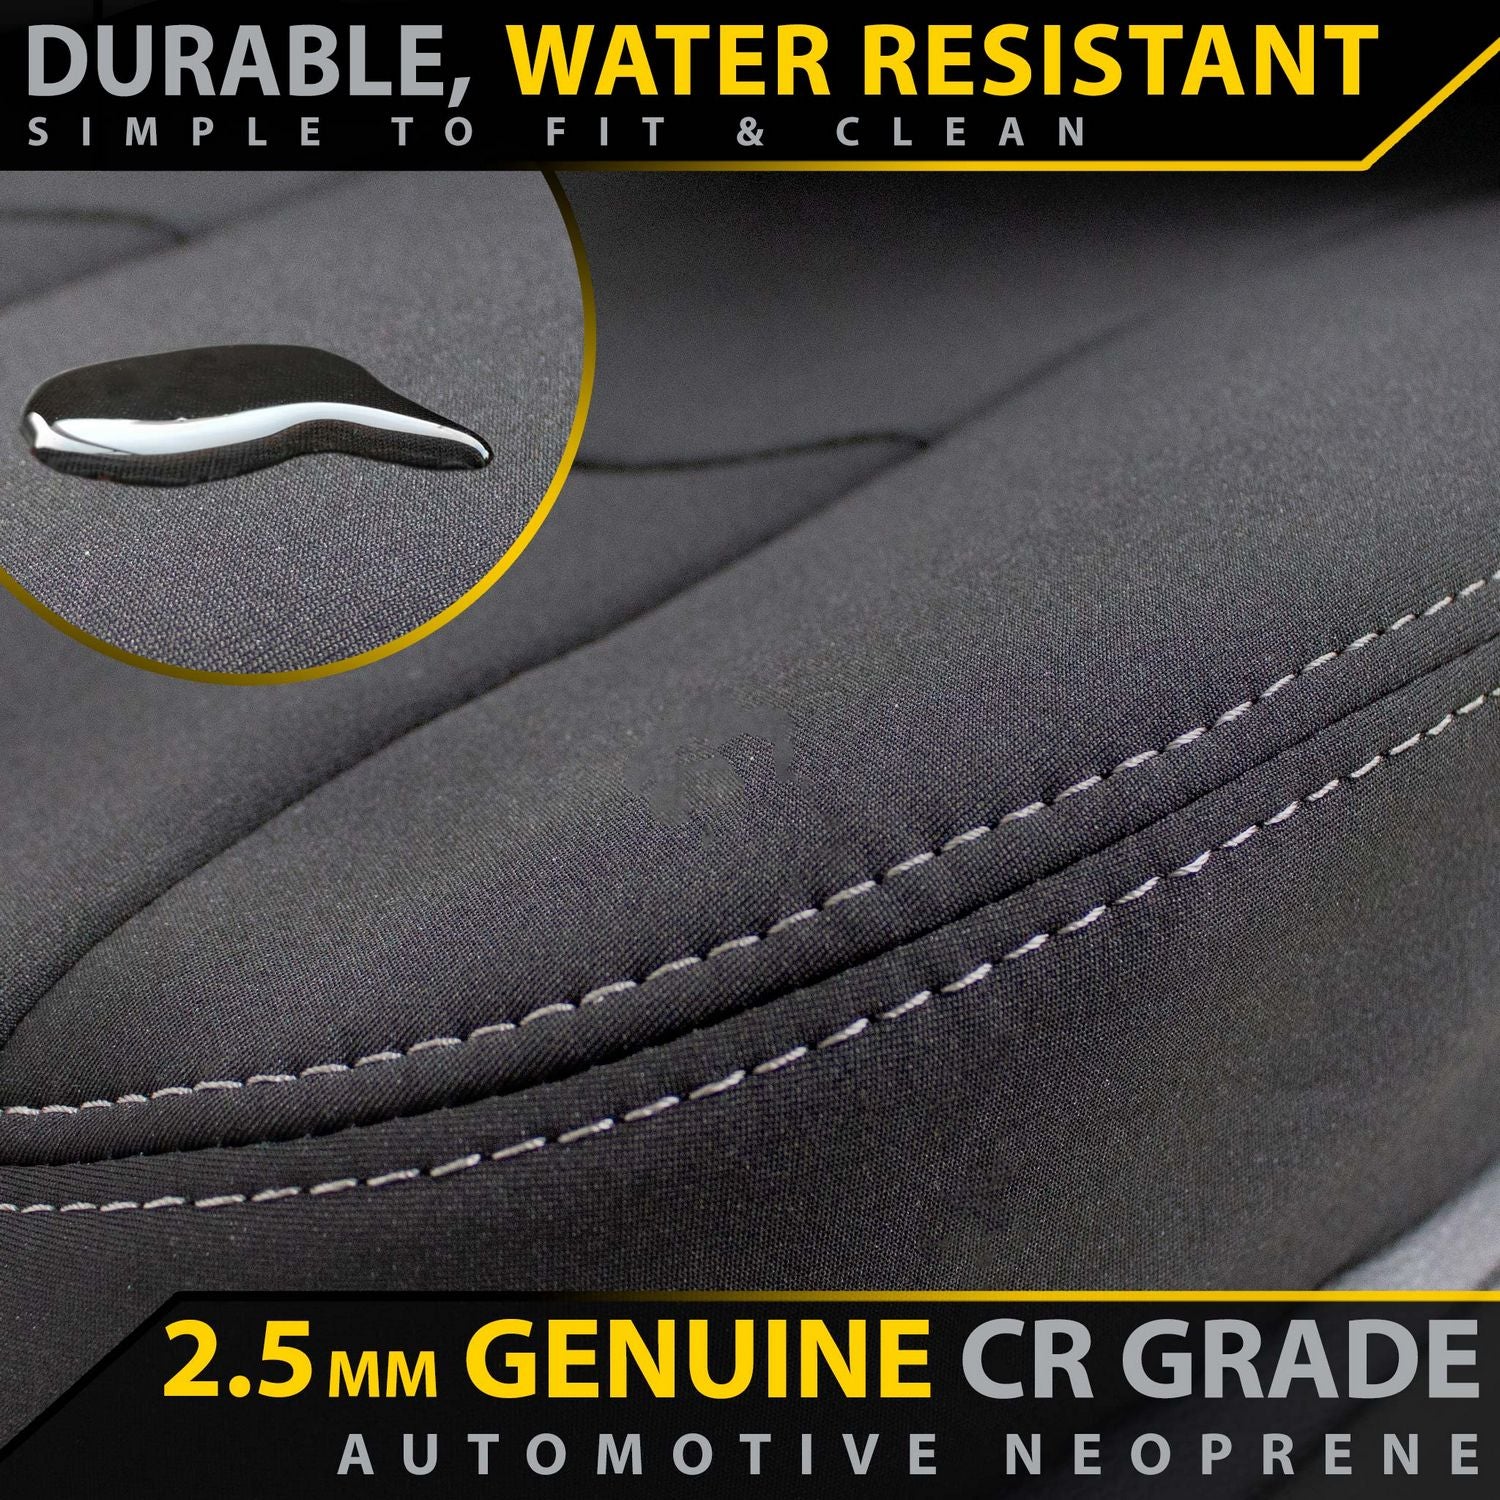 Isuzu D-MAX RG Single Cab Neoprene 2x Front Seat Covers (Available)